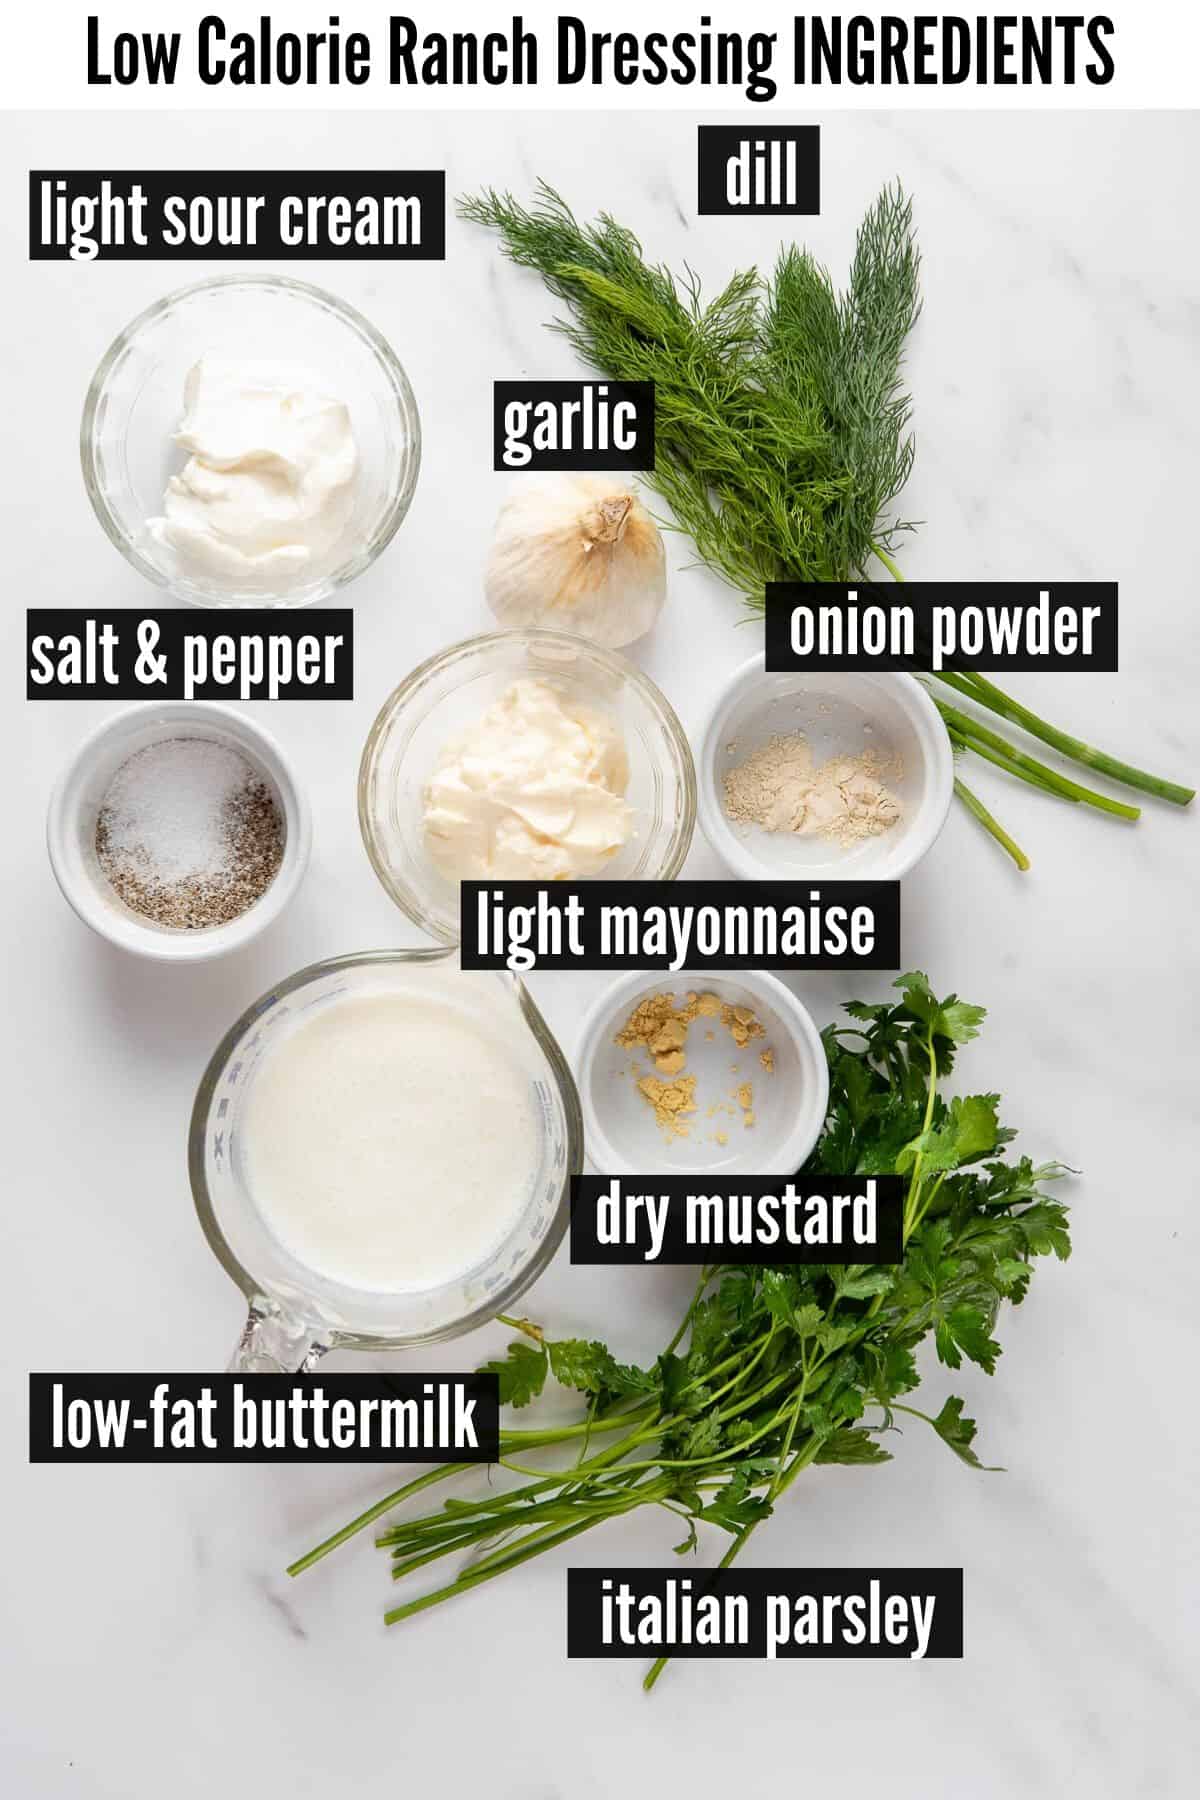 low calorie ranch dressing labelled ingredients.